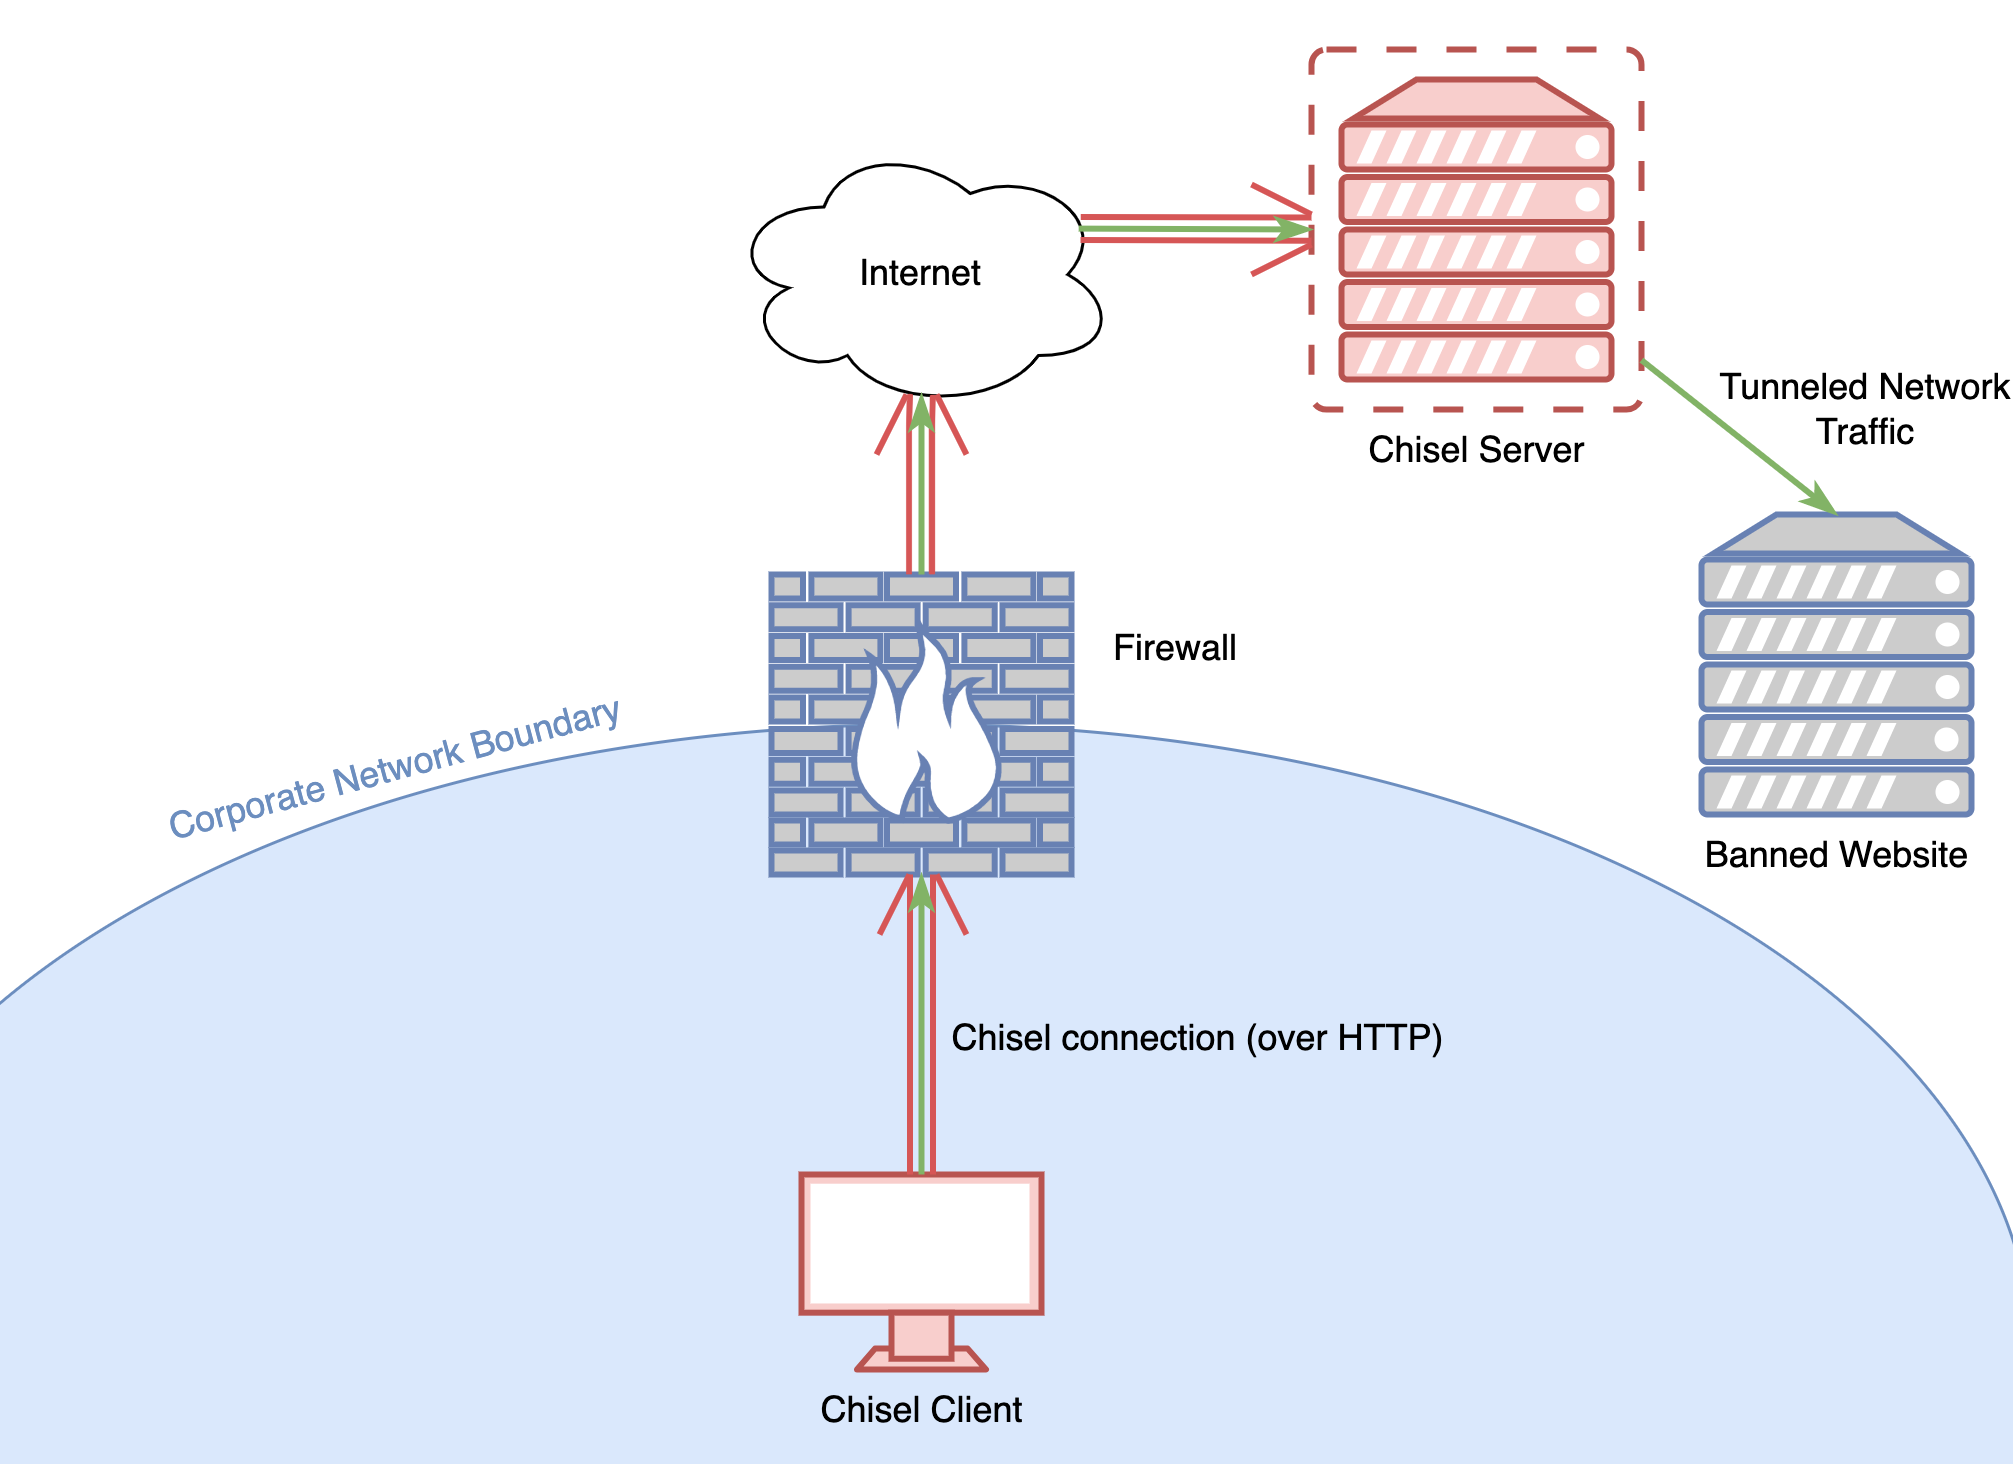 Using the Chisel SOCKS proxy to circumvent network traffic filtering on the firewall